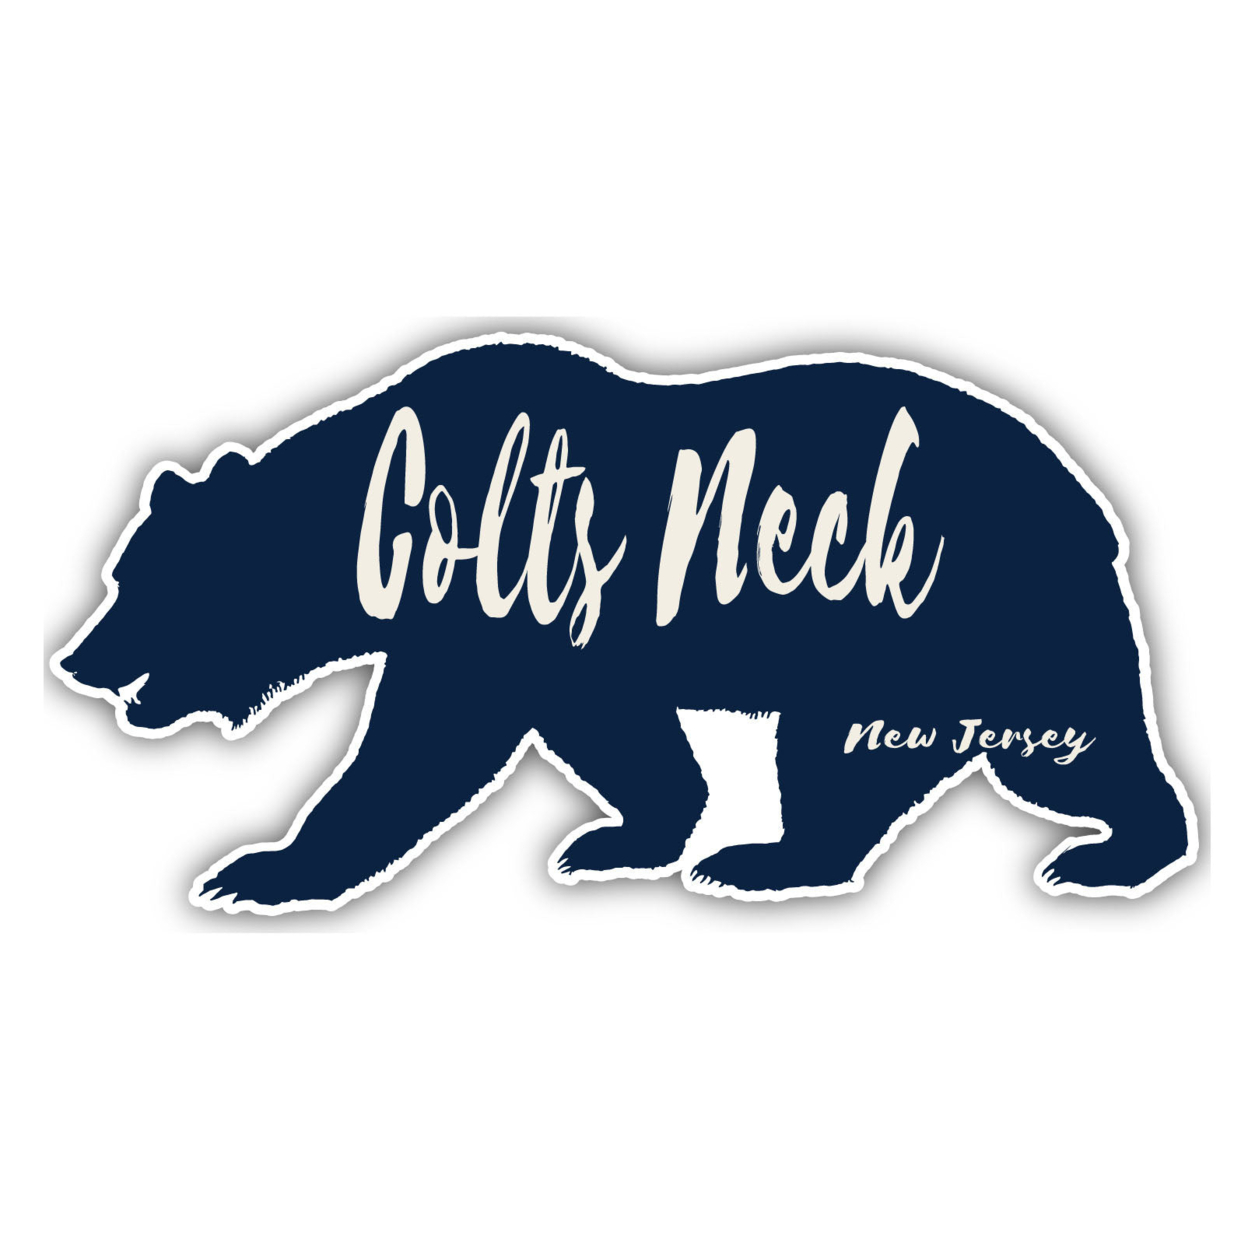 Colts Neck New Jersey Souvenir Decorative Stickers (Choose Theme And Size) - 4-Pack, 12-Inch, Bear